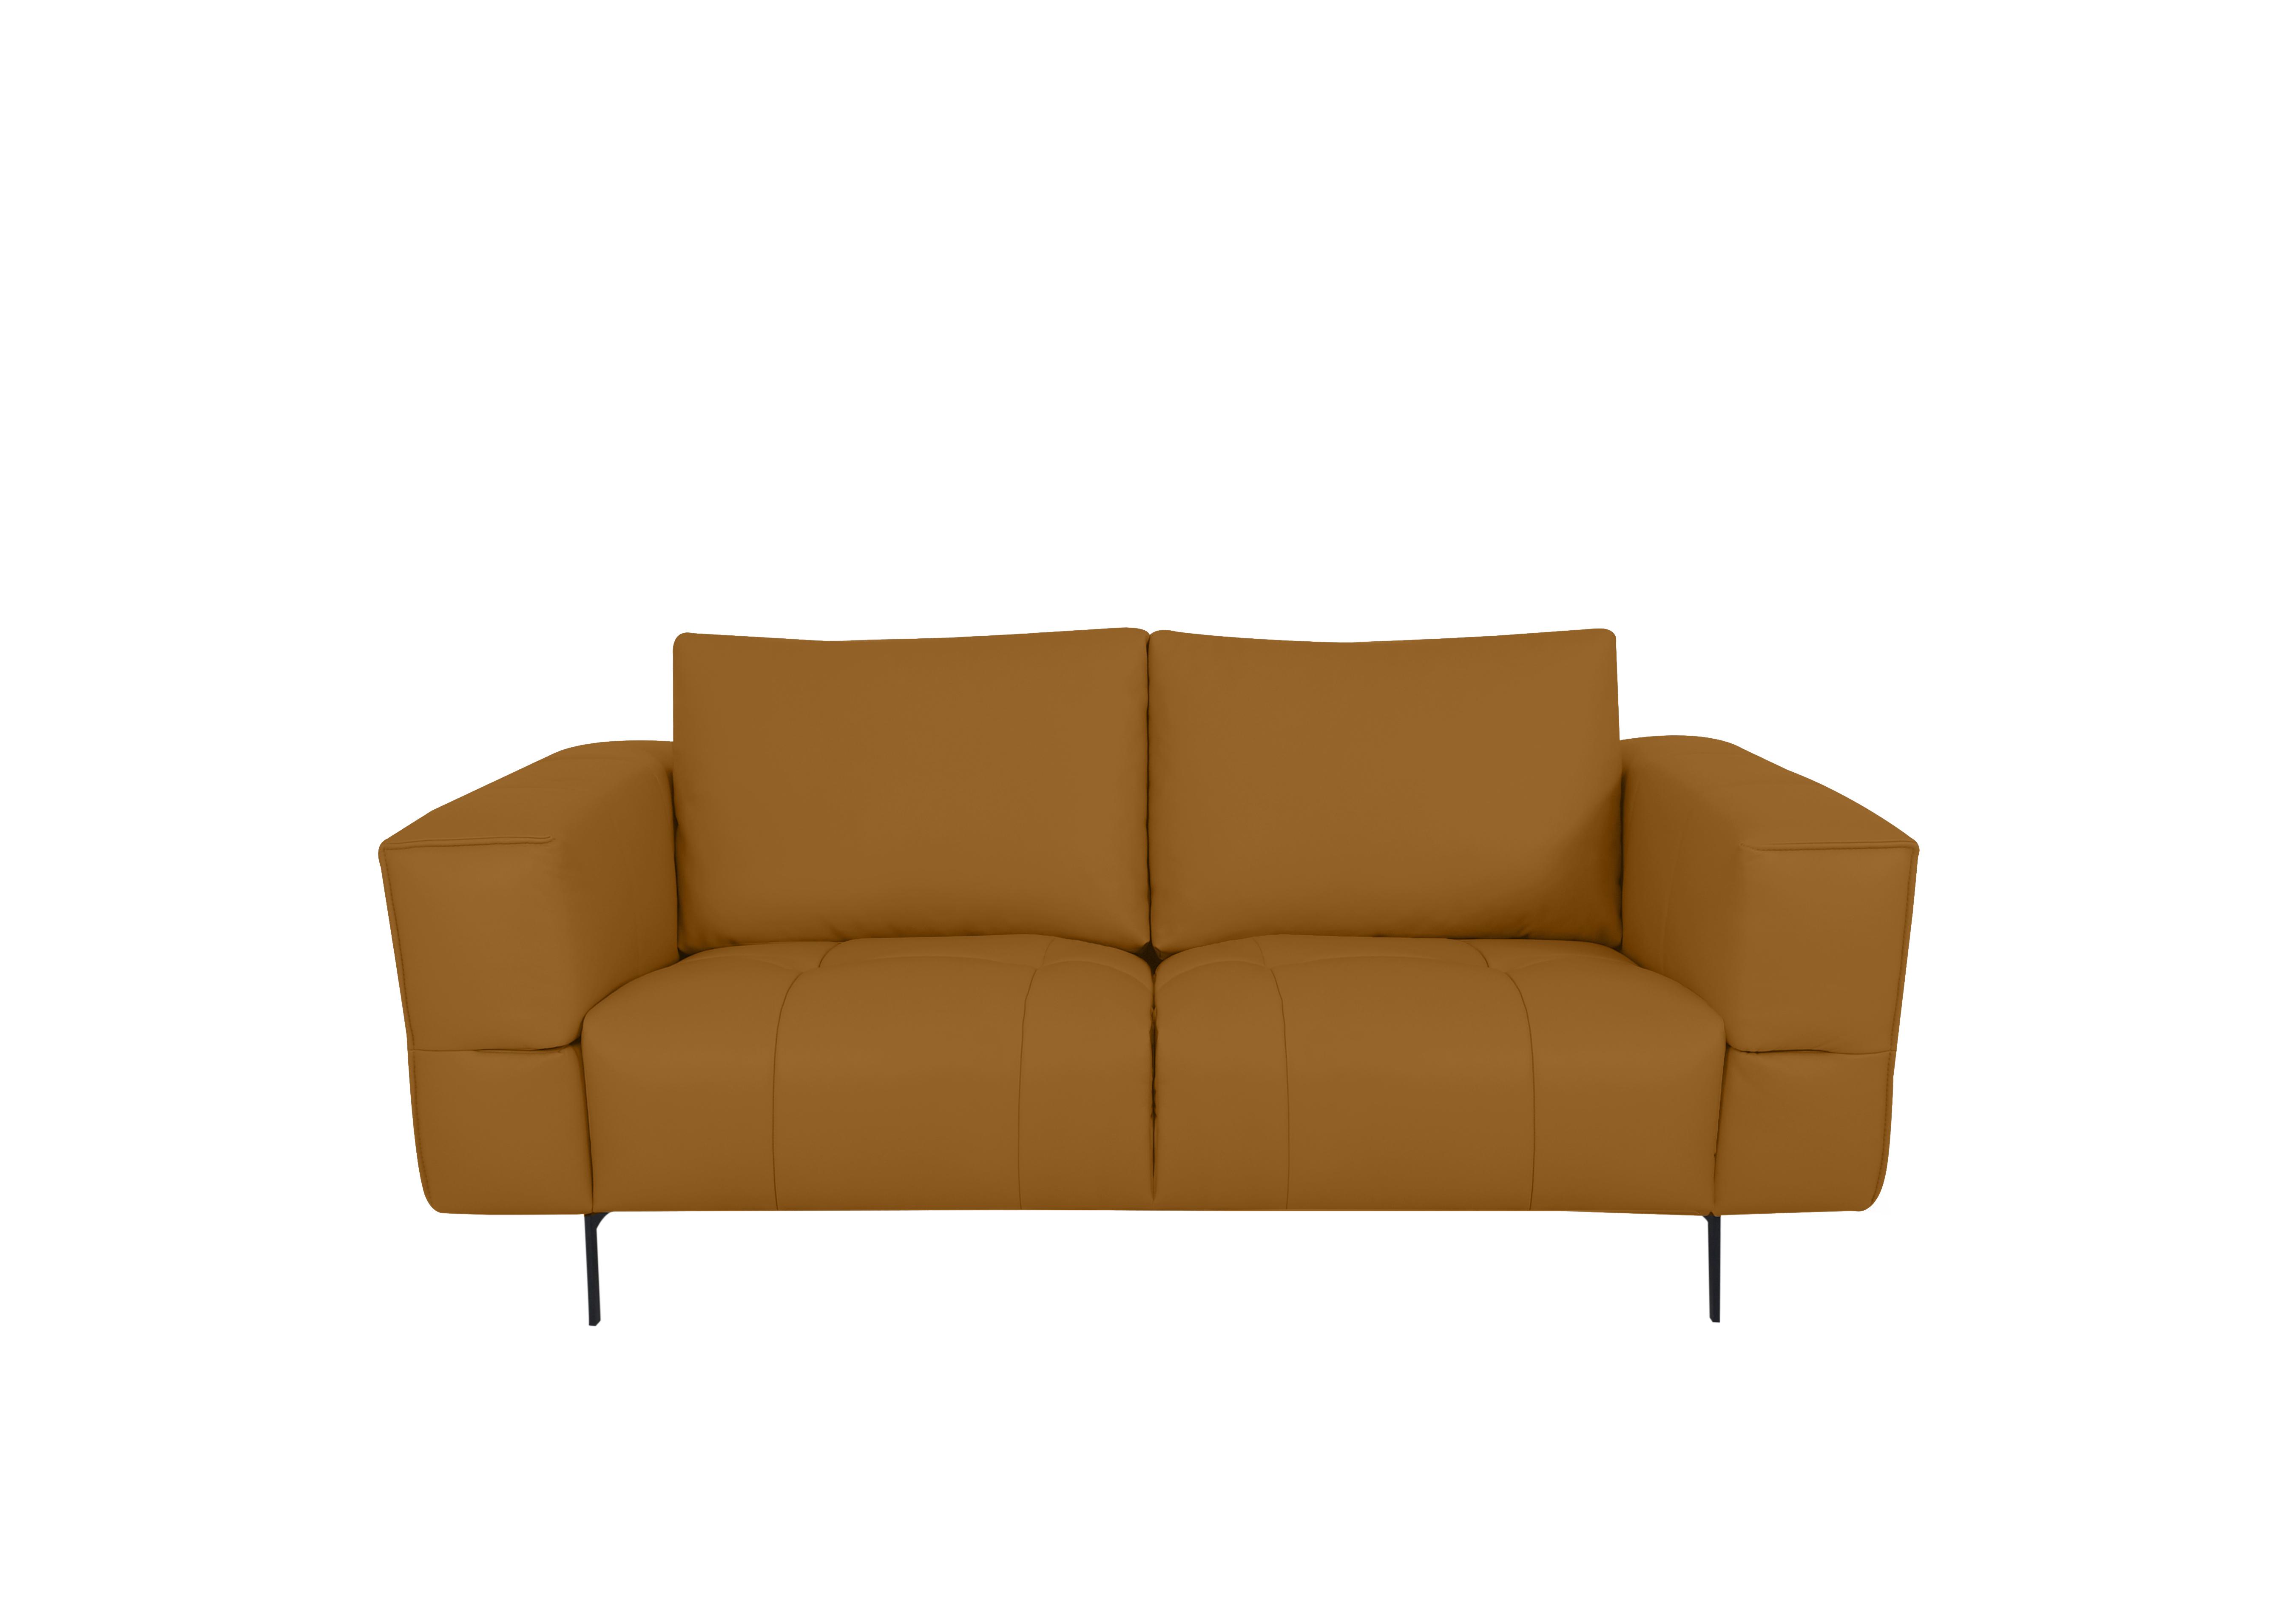 Lawson 2 Seater Leather Sofa in Np-606e Honey Yellow on Furniture Village